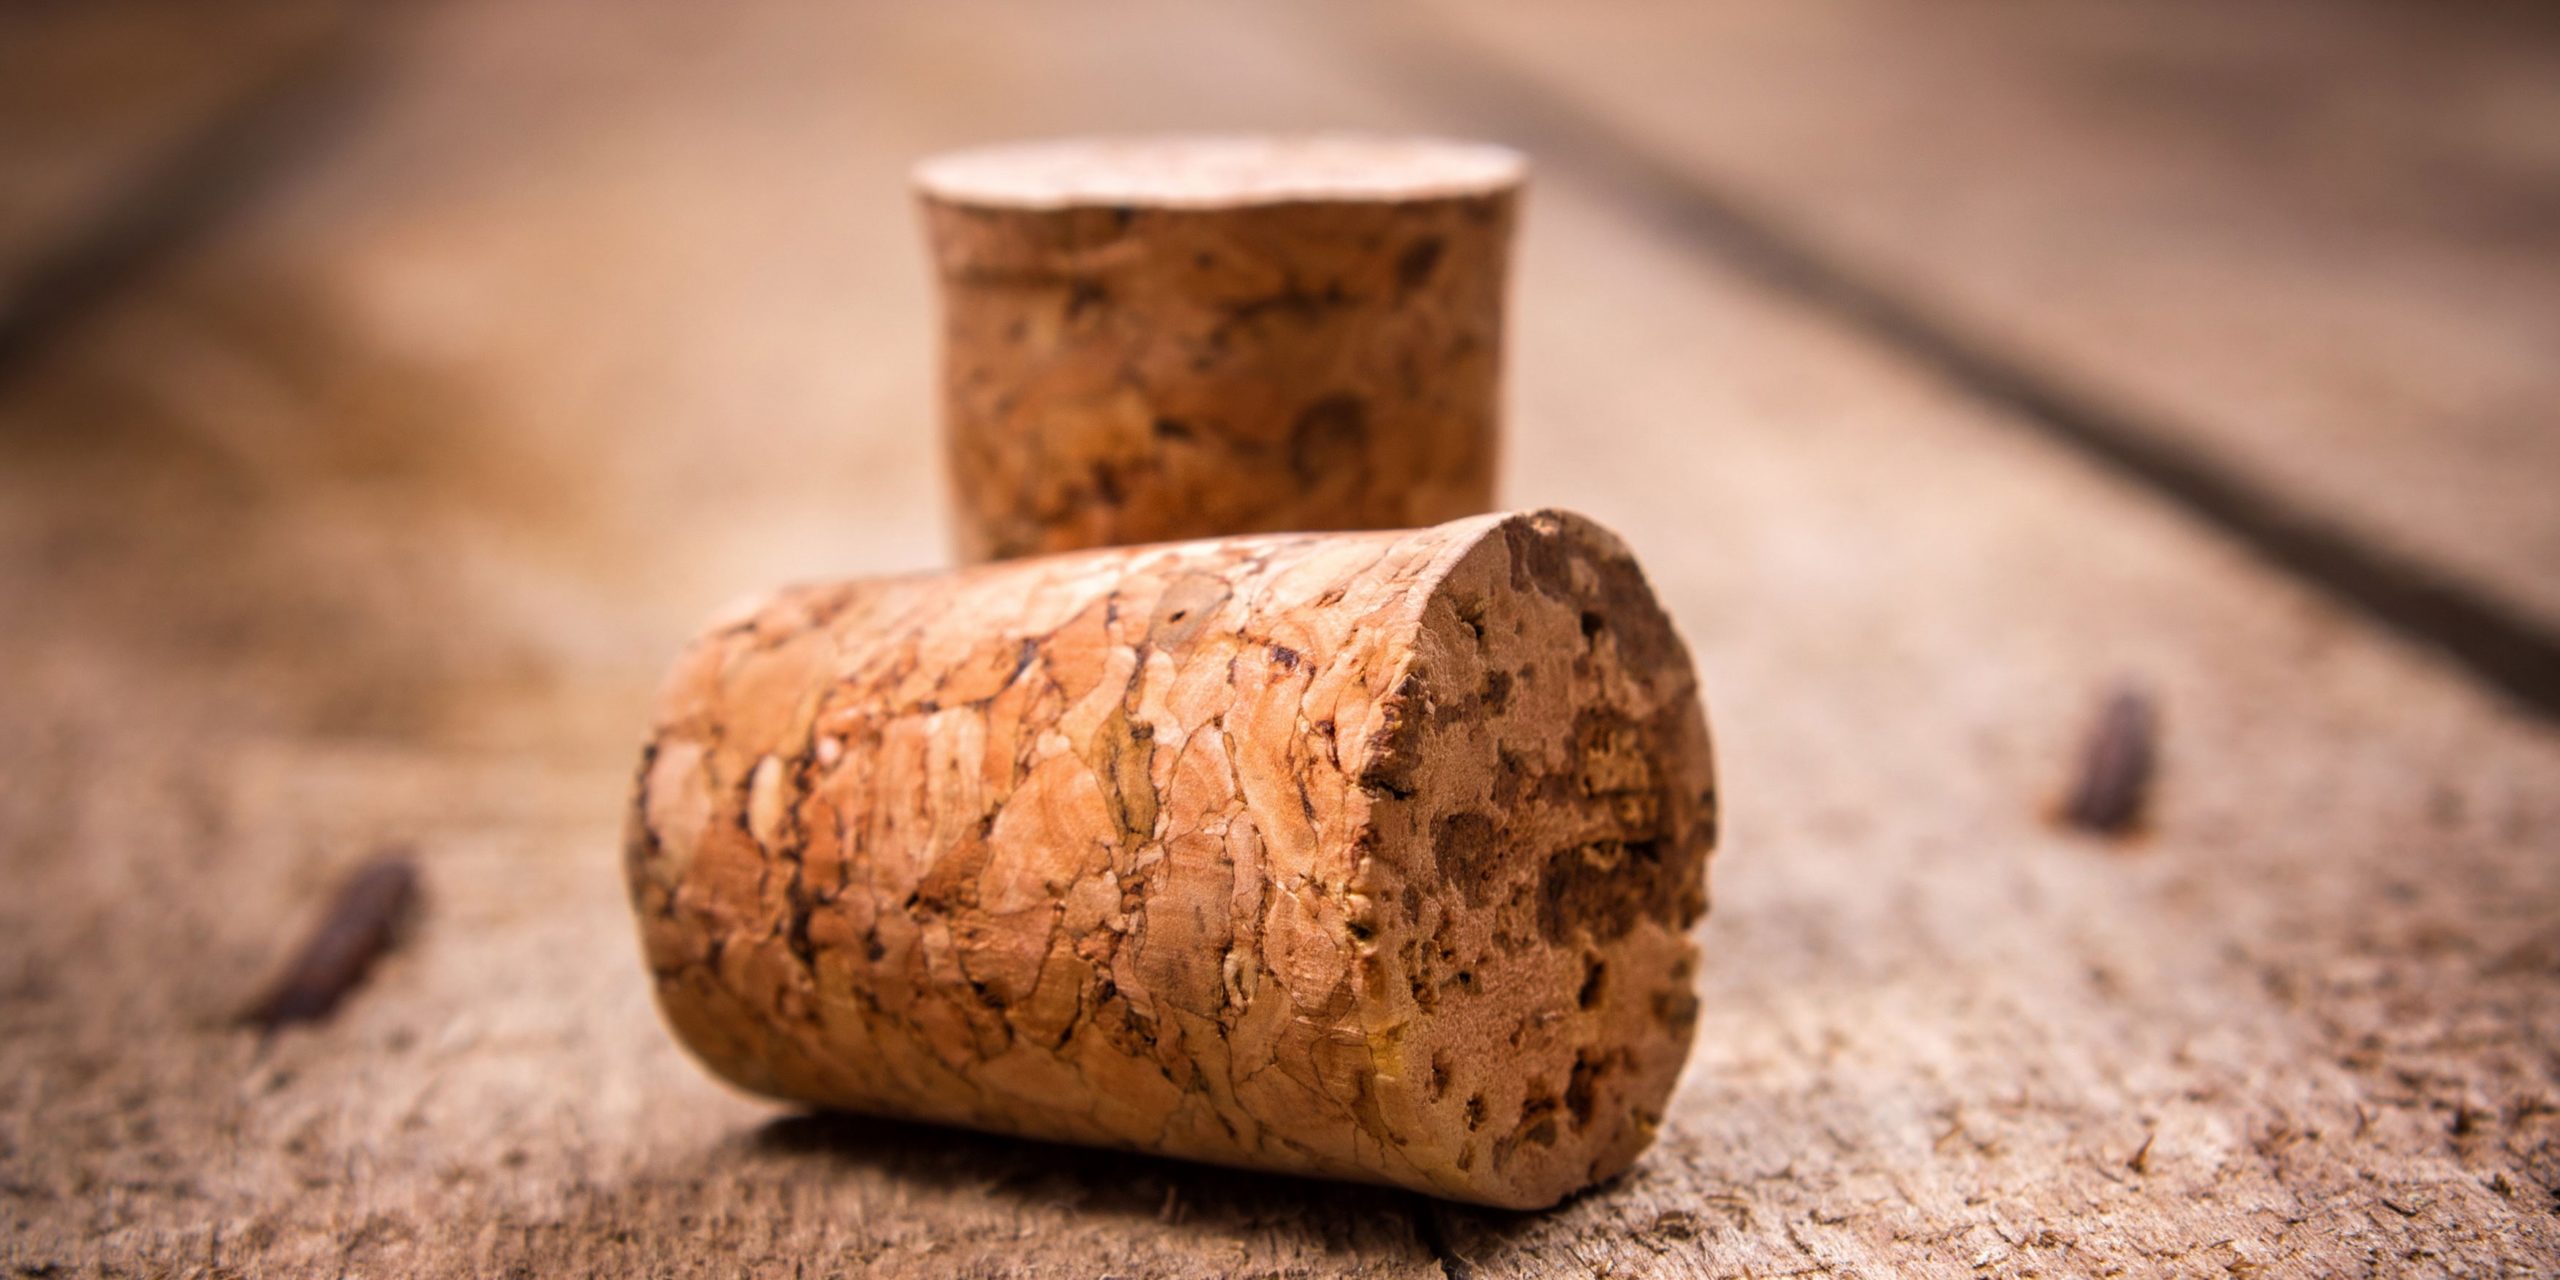 Could Cork Save the Beauty Industry's Carbon Footprint?